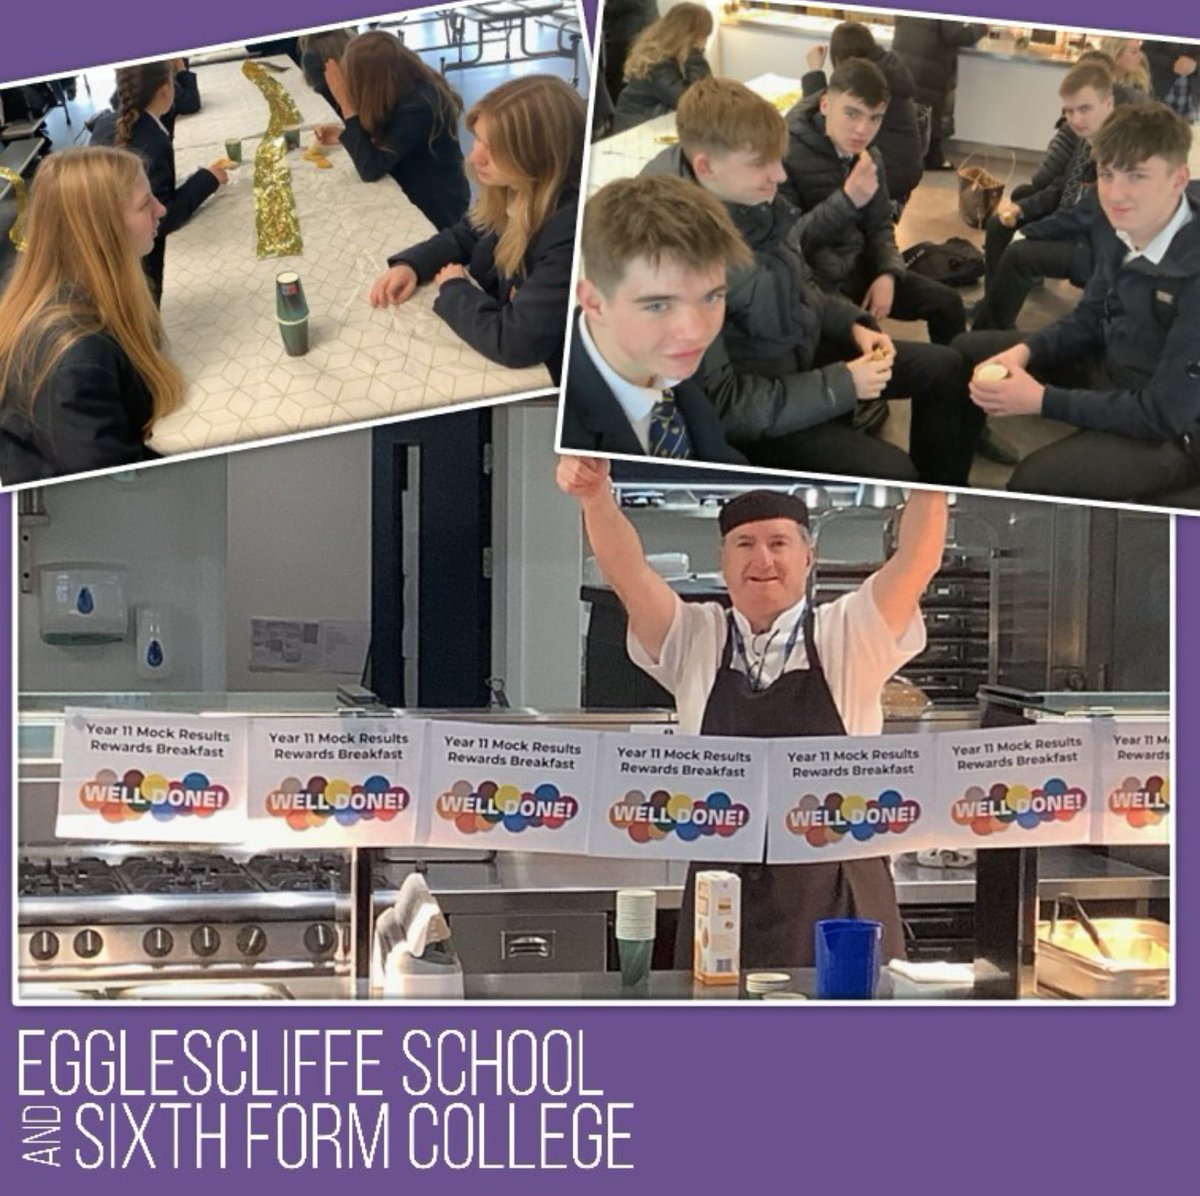 This morning 50 of our Year 11 students enjoyed a rewards breakfast to celebrate their progress in the mock exams. Thanks to Mr Clemie and his team for cooking the breakfast, and congratulations to the students! 🥓 🍳 🥯